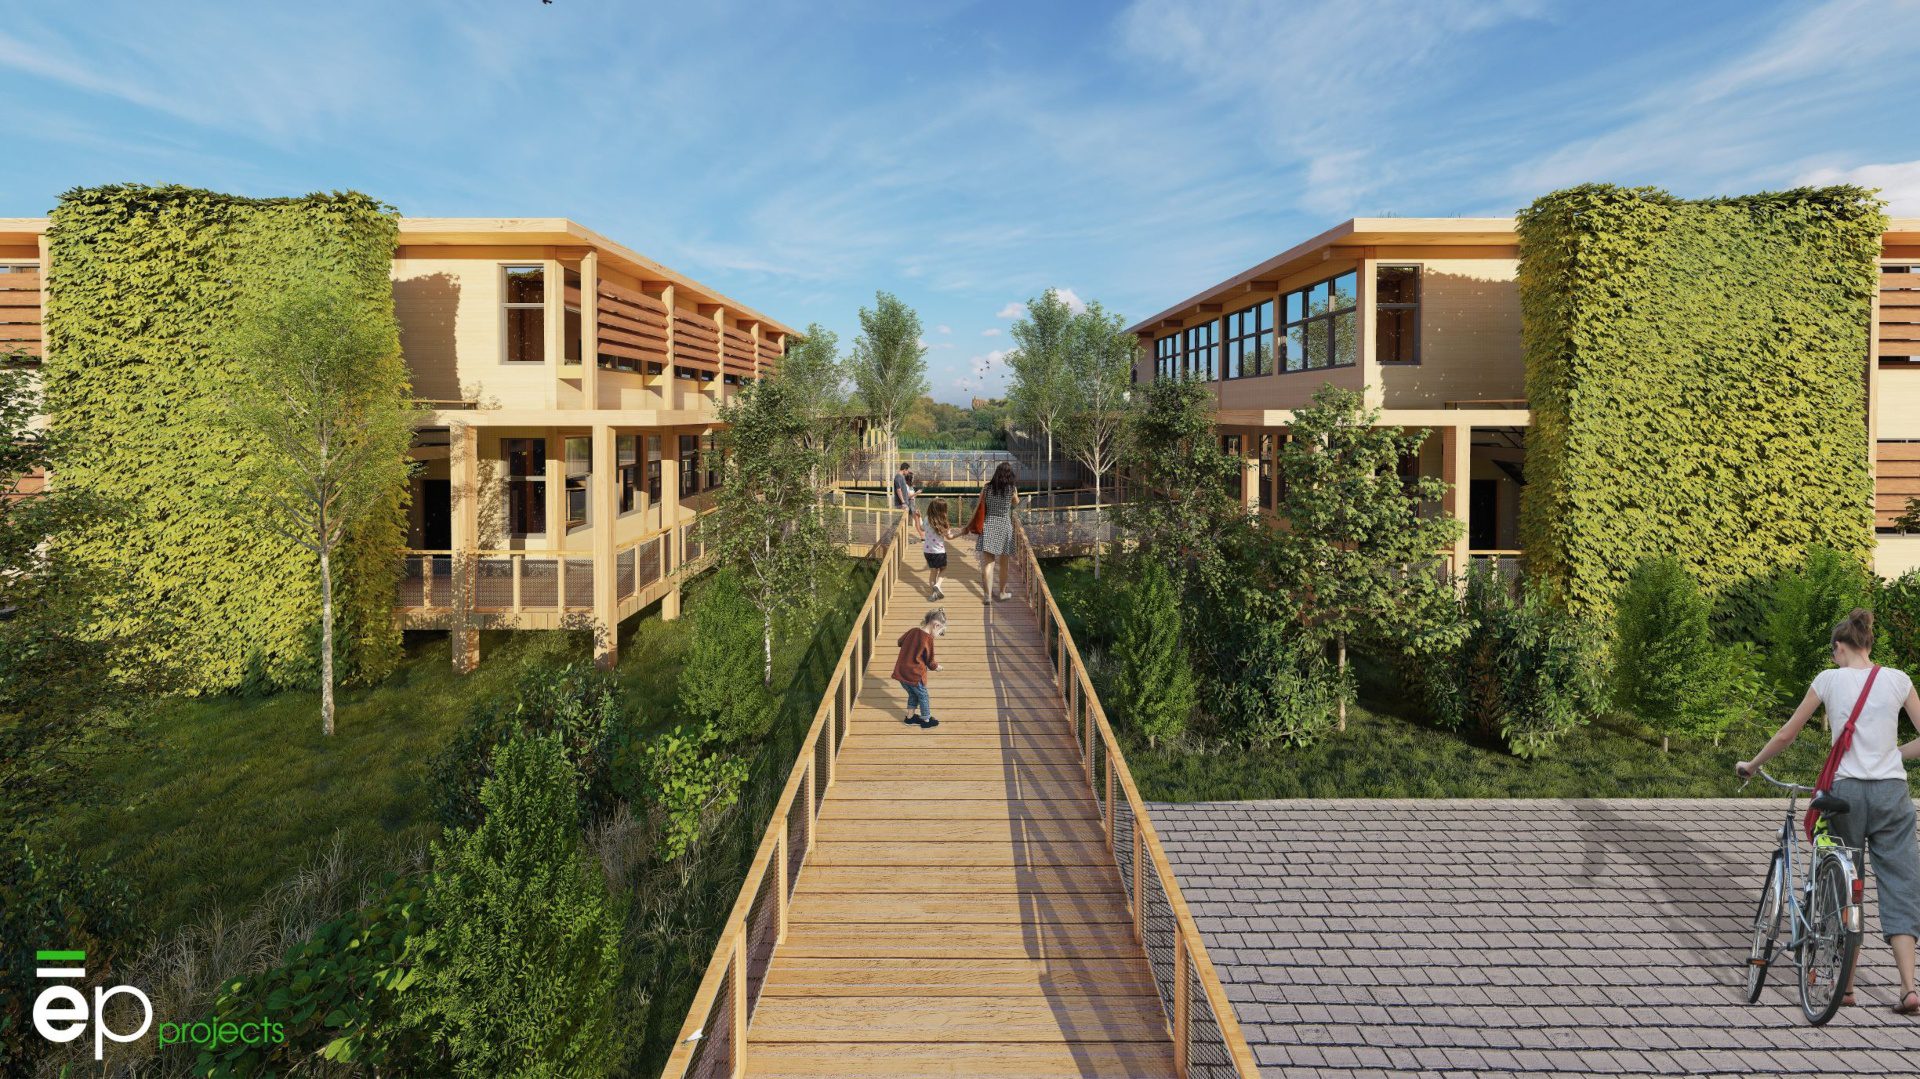 Planning permission granted for a £10m nature-based redevelopment in Romsey